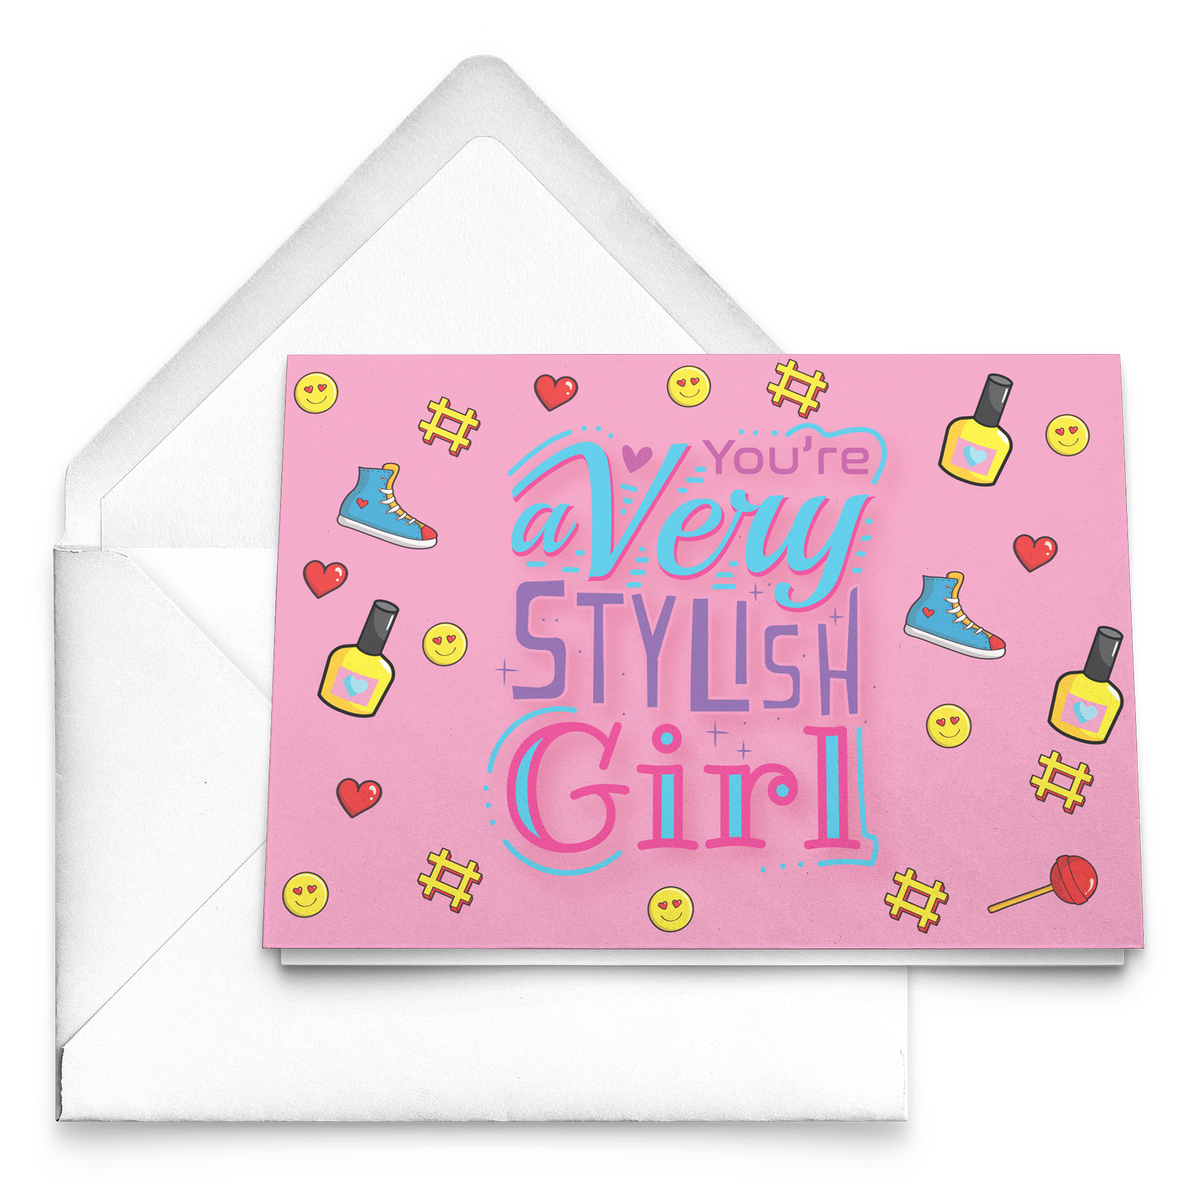 YOU'RE A VERY STYLISH GIRL NOTE CARD